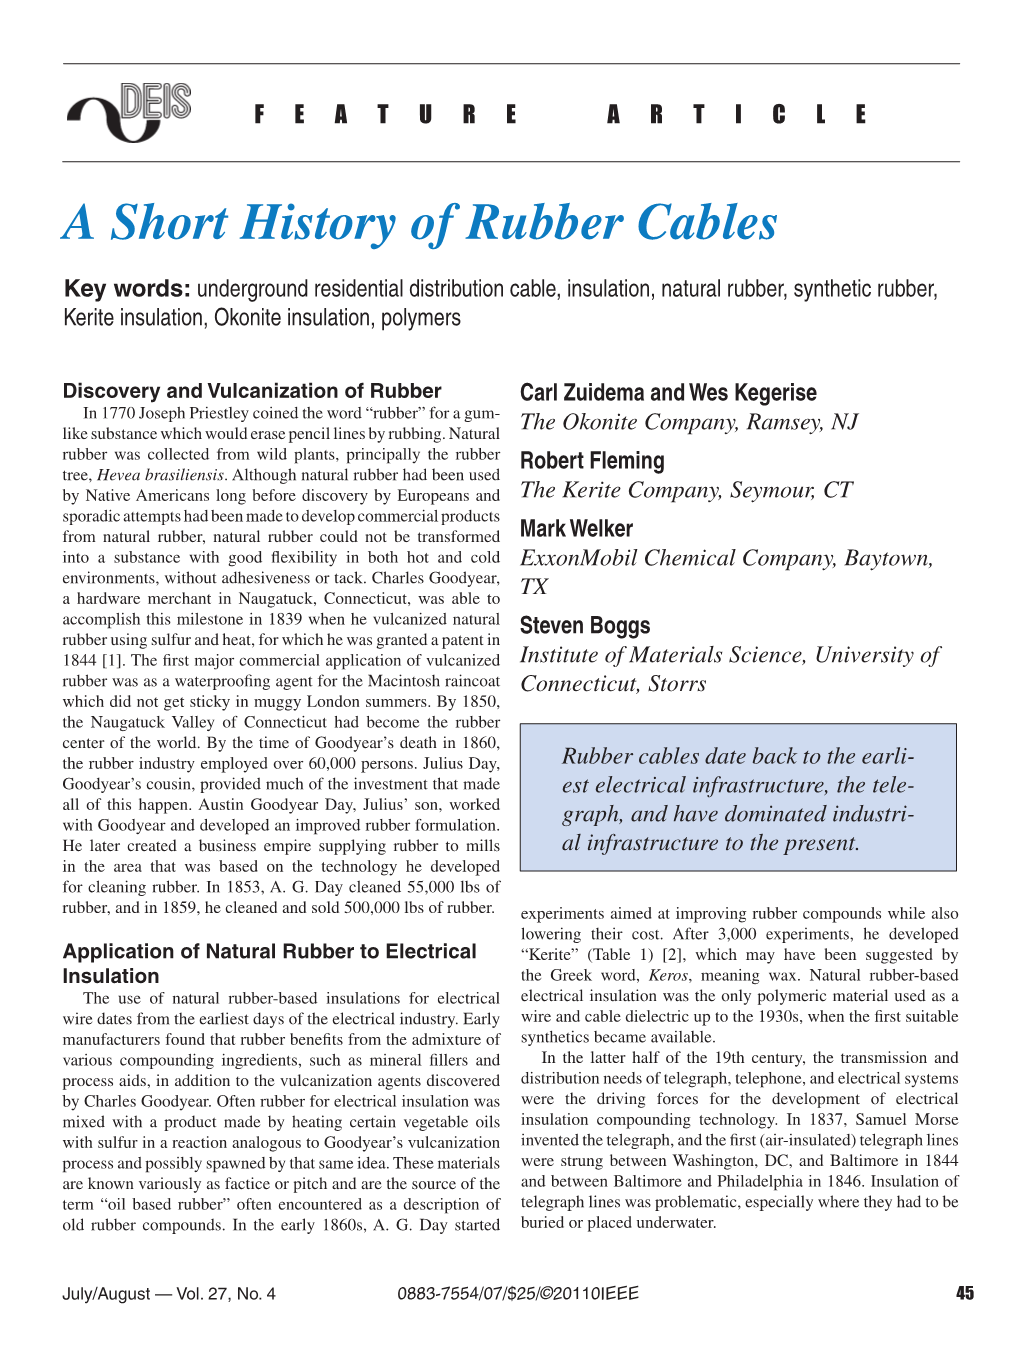 A Short History of Rubber Cables